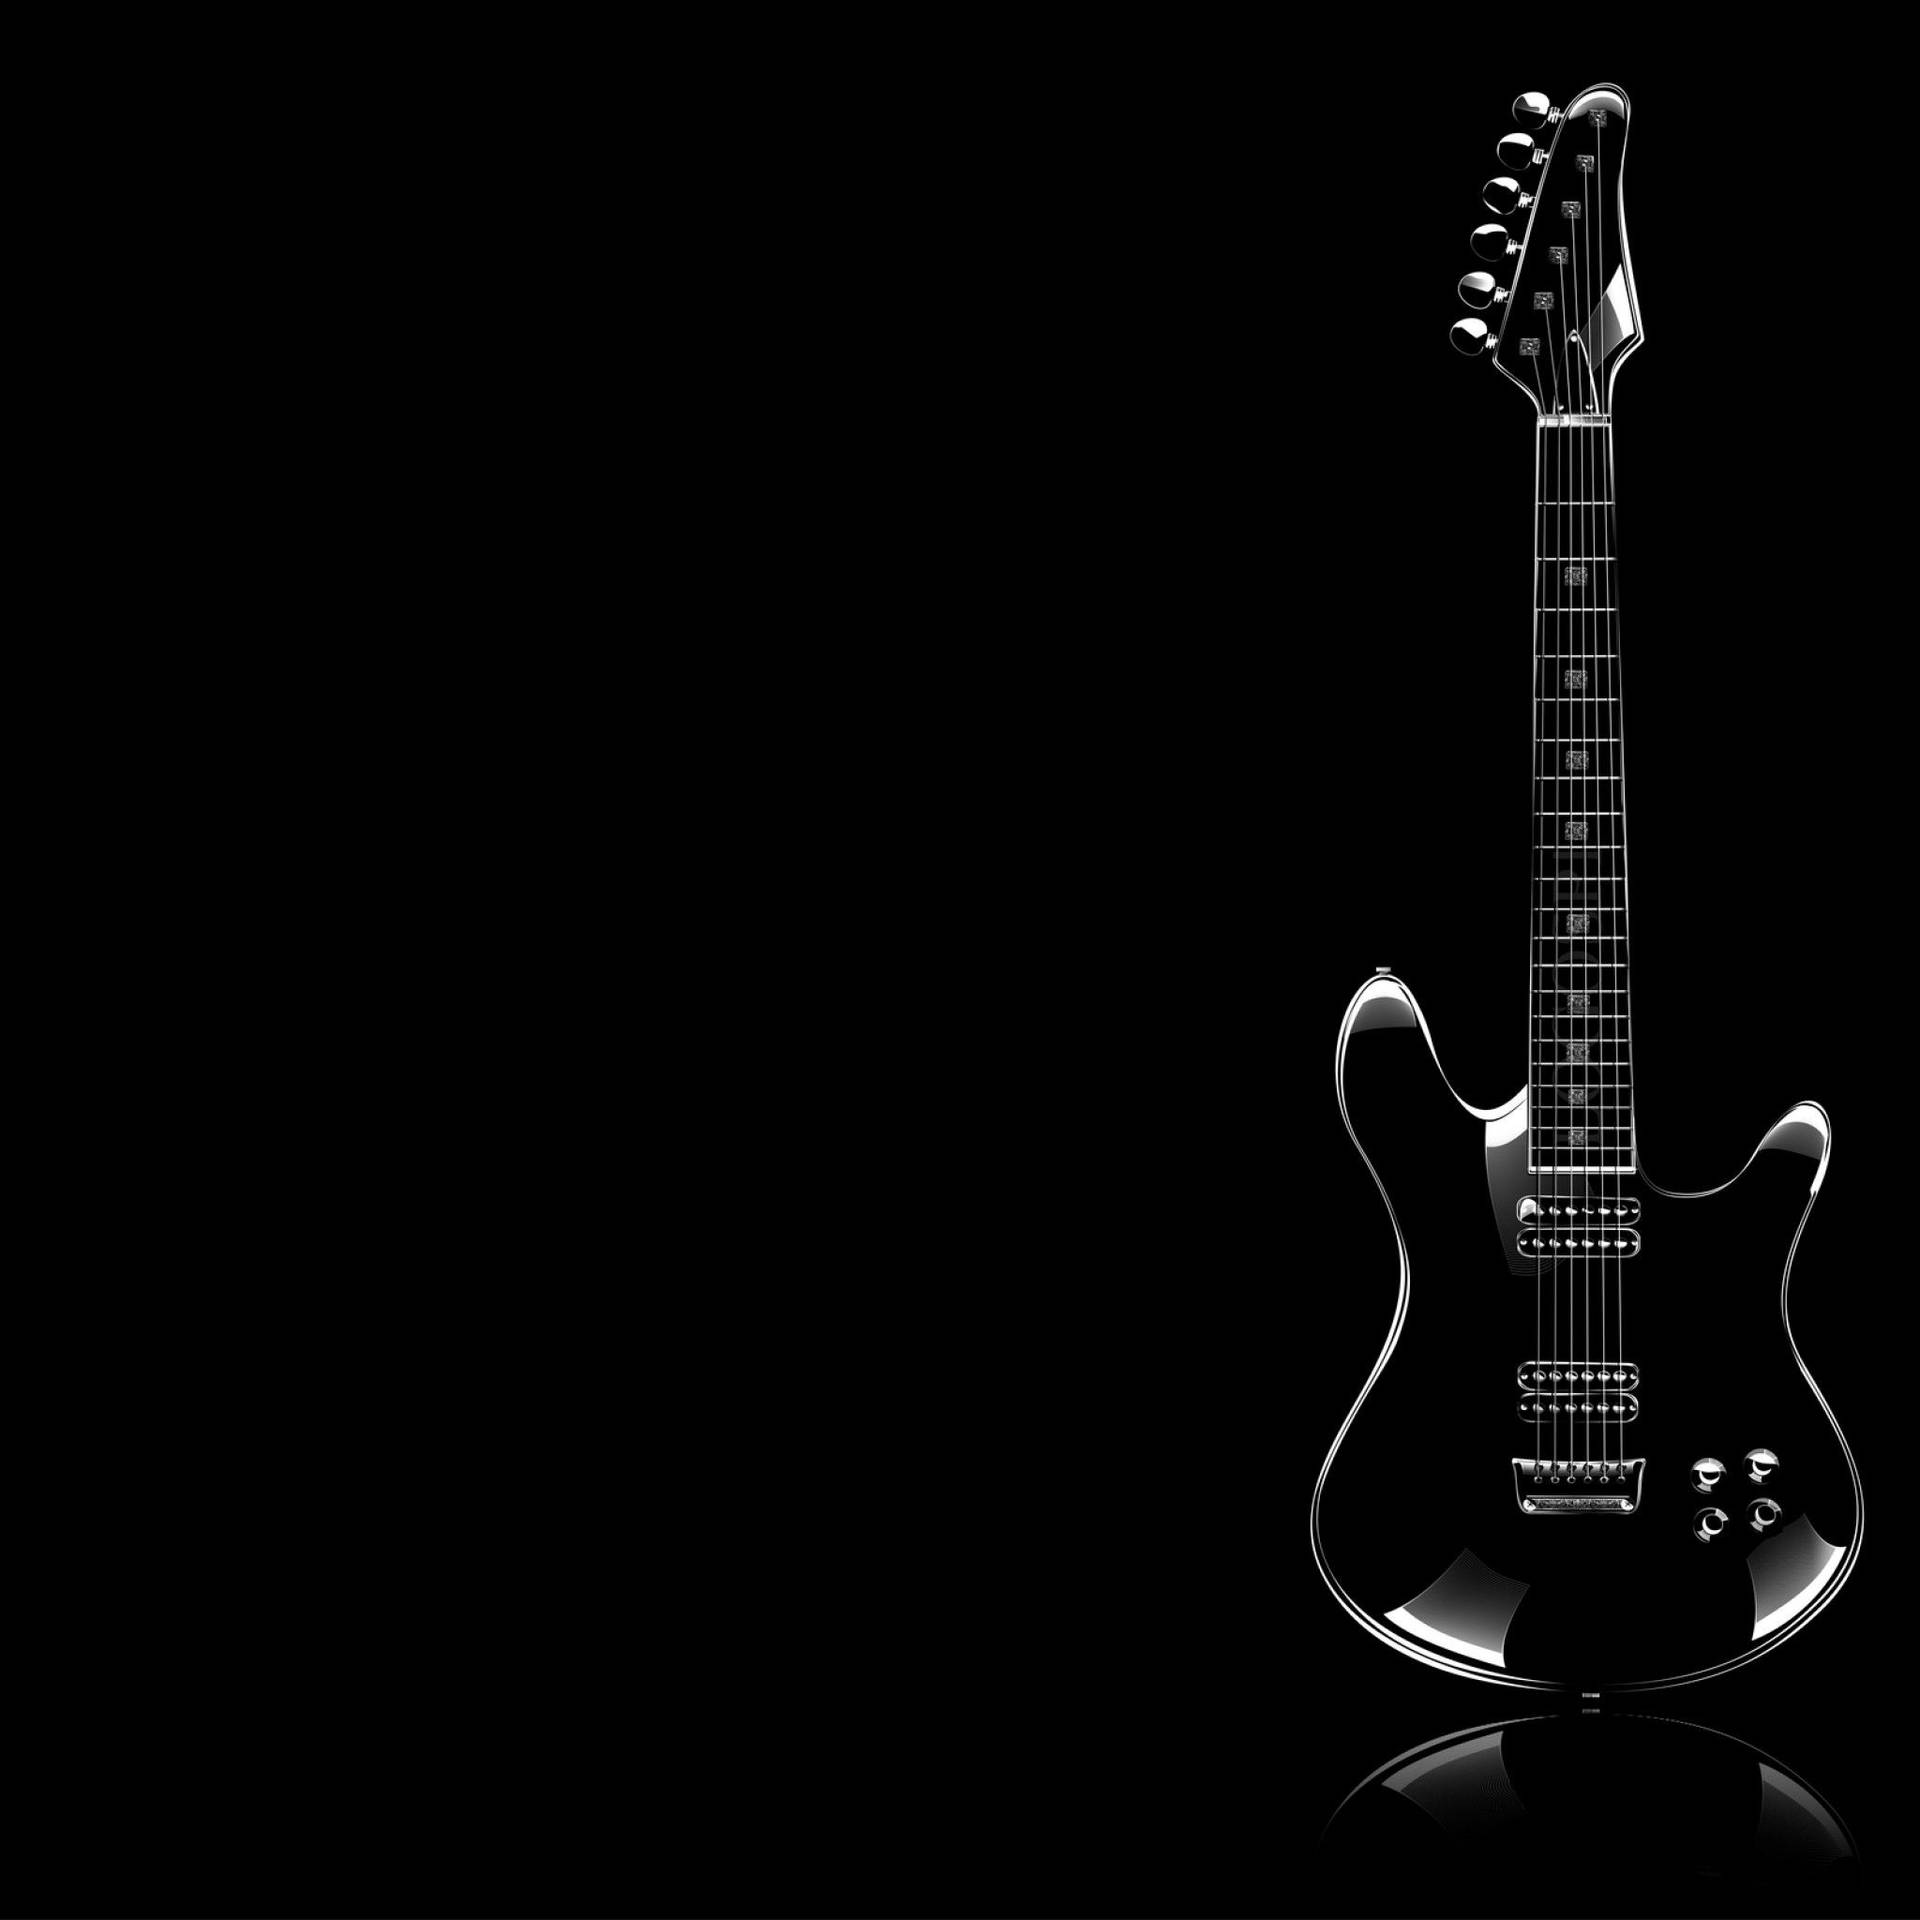 Awesome wallpaper of black, shiny guitar on black background. 